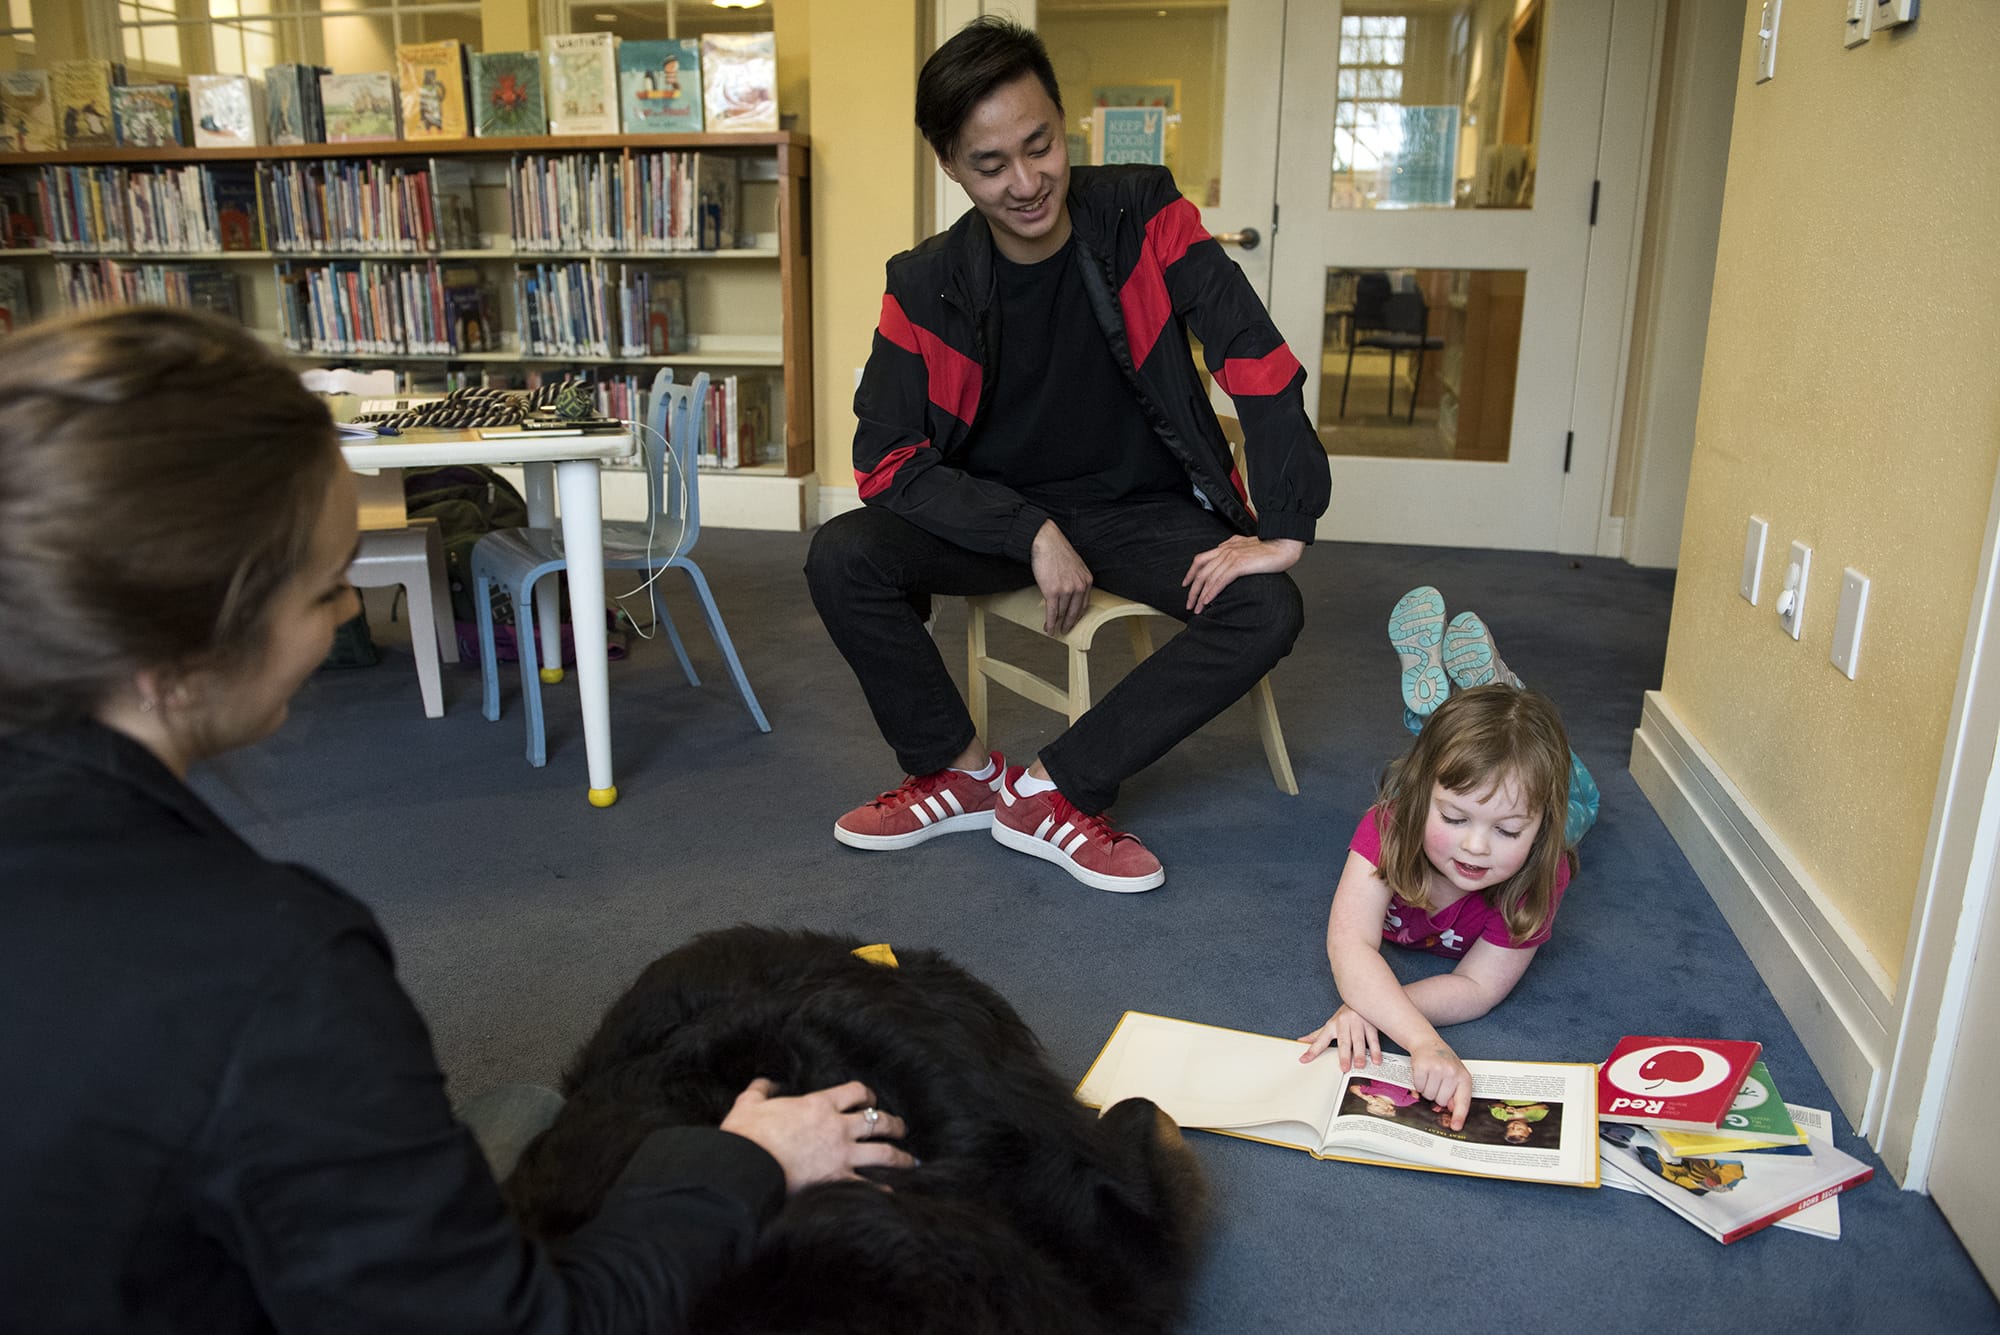 Camas High School seniors Kaylee Merritt, far left, and Aaron Le listen to Lisa Wooten of Camas, 4, as she reads to Cooper on Tuesday at the Camas Public Library. Merritt and Le rotate with two other students on Tuesdays and Thursdays, working with Cooper for their high school senior projects.